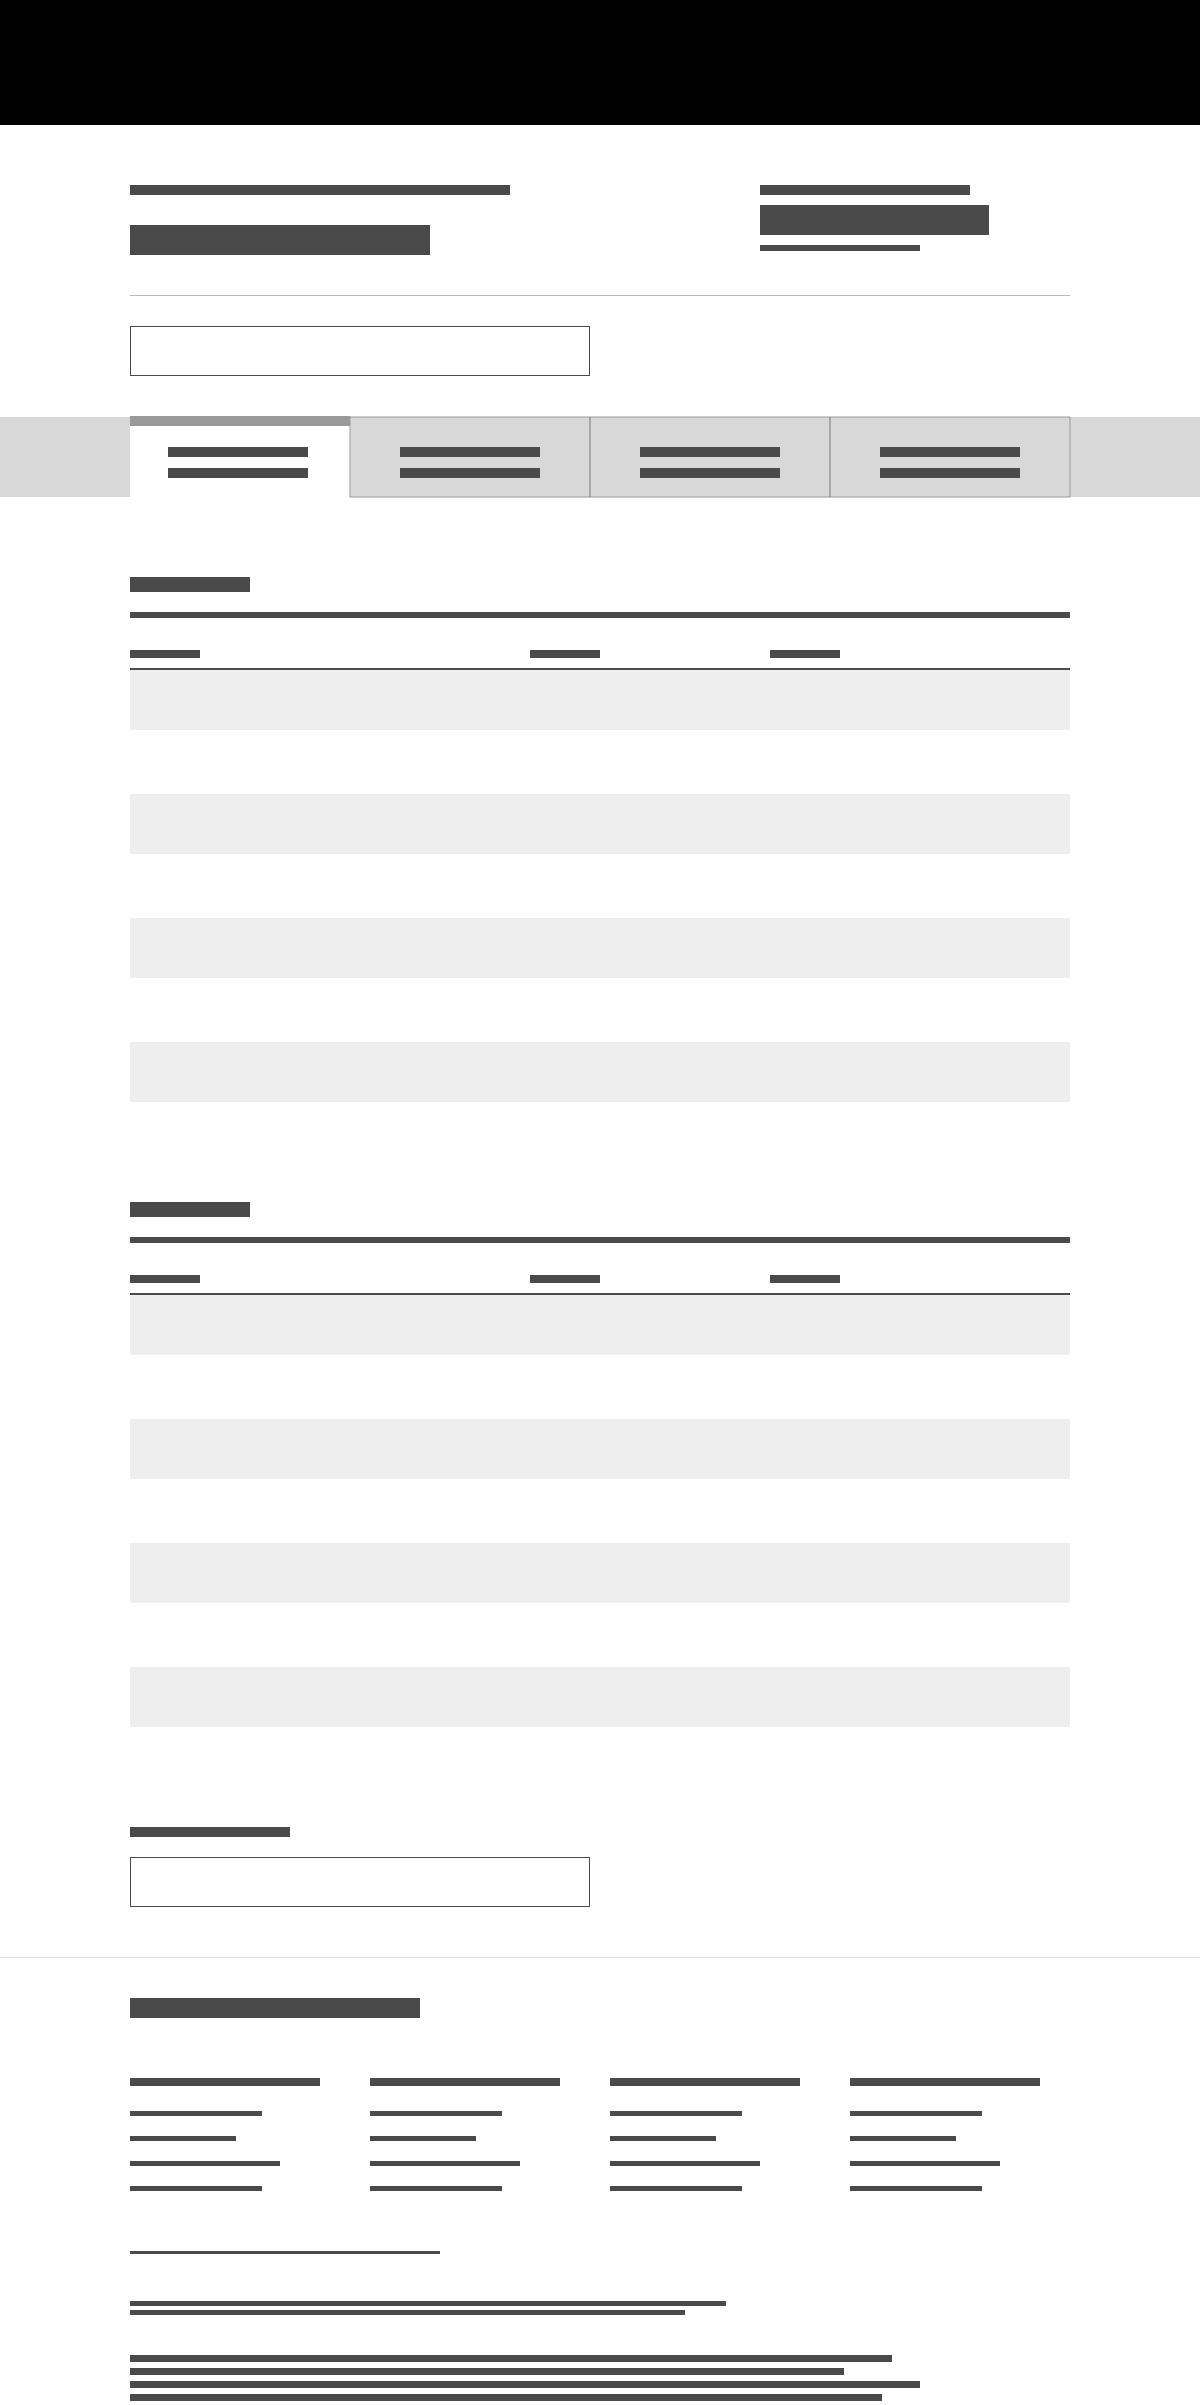 representation of a page archetype featuring tables